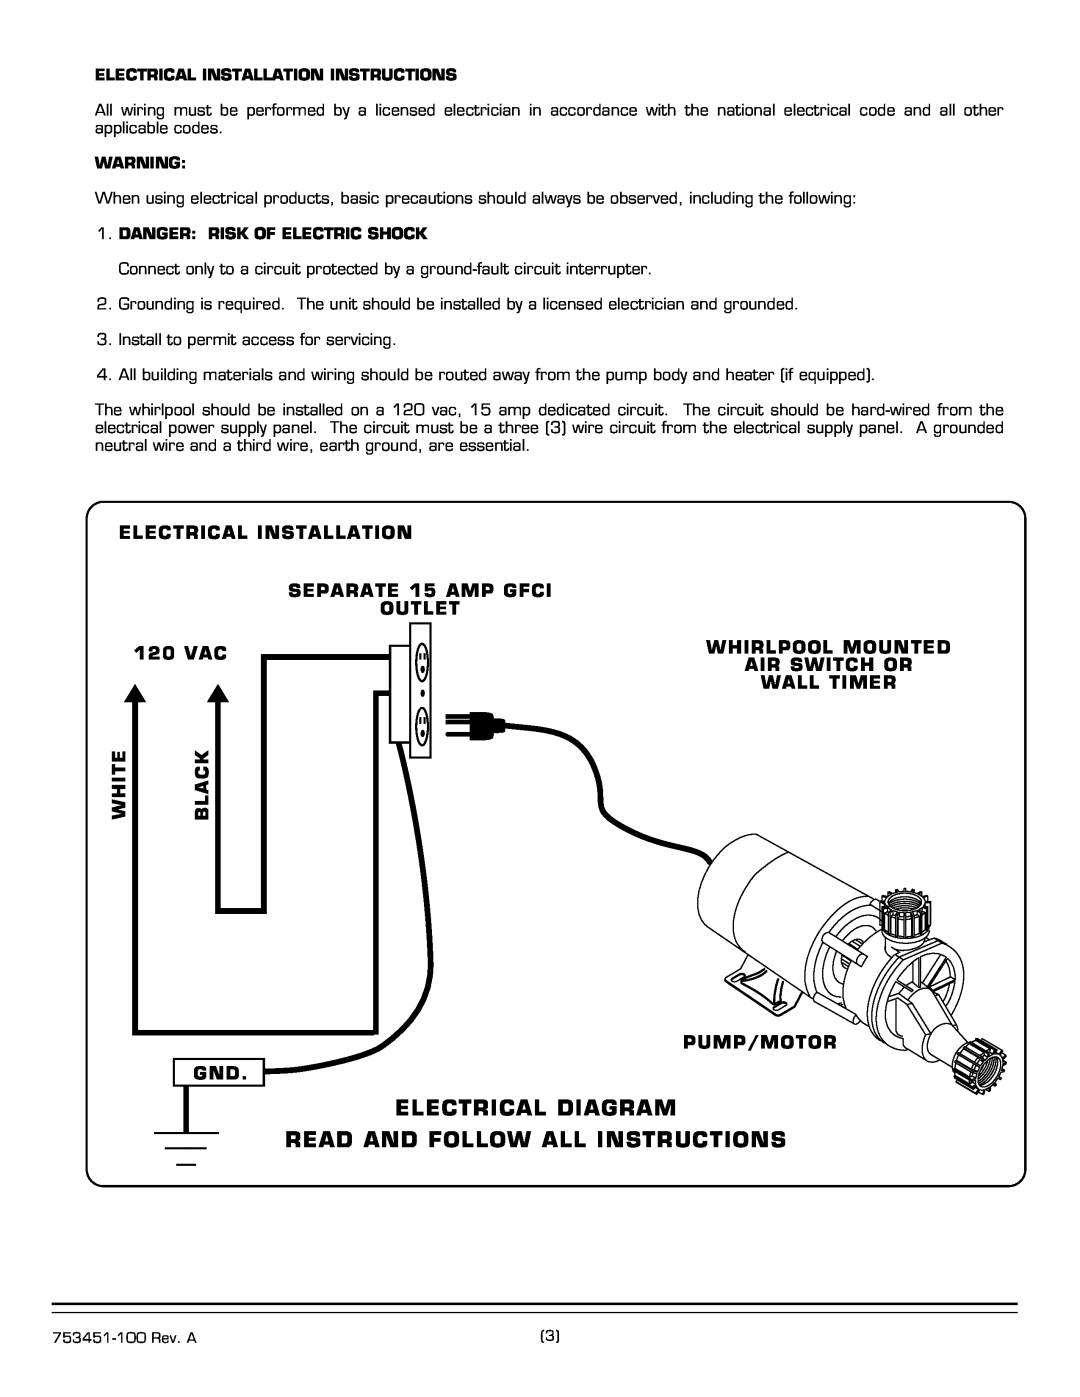 American Standard 1730 SERIES installation instructions Electrical Diagram, Read And Follow All Instructions 